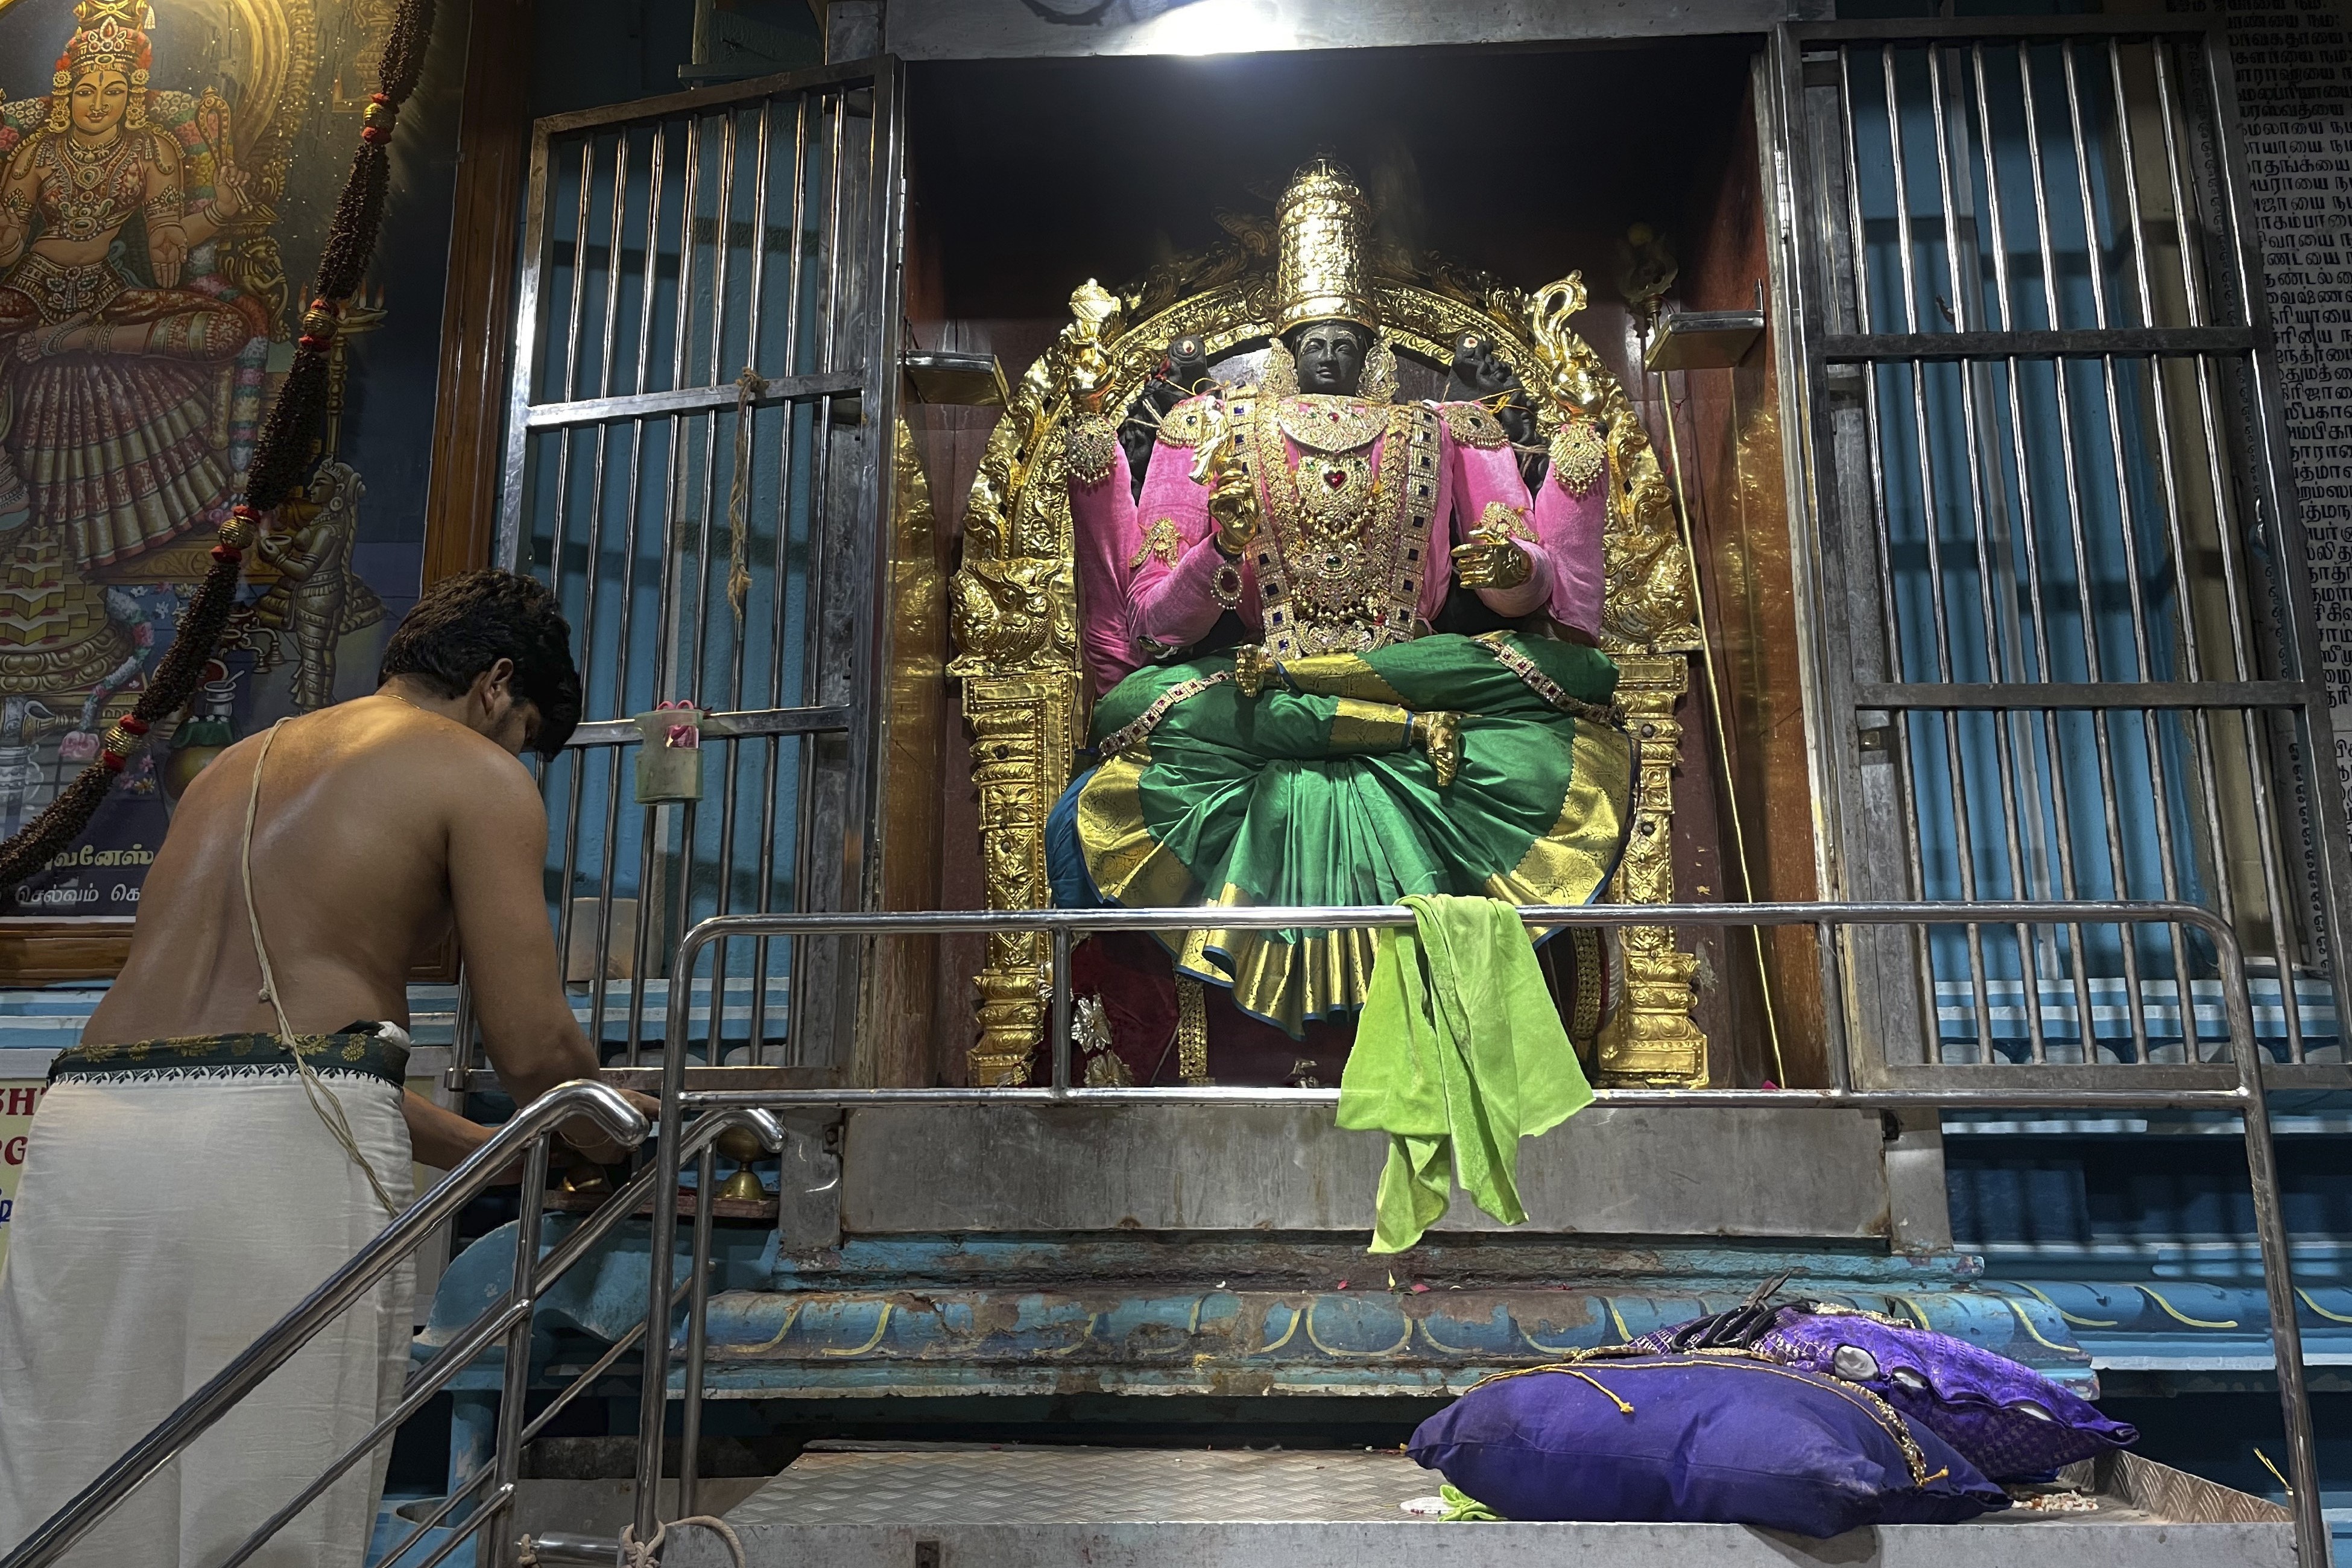 In India, deity decorating a calling for Hindu temple artist